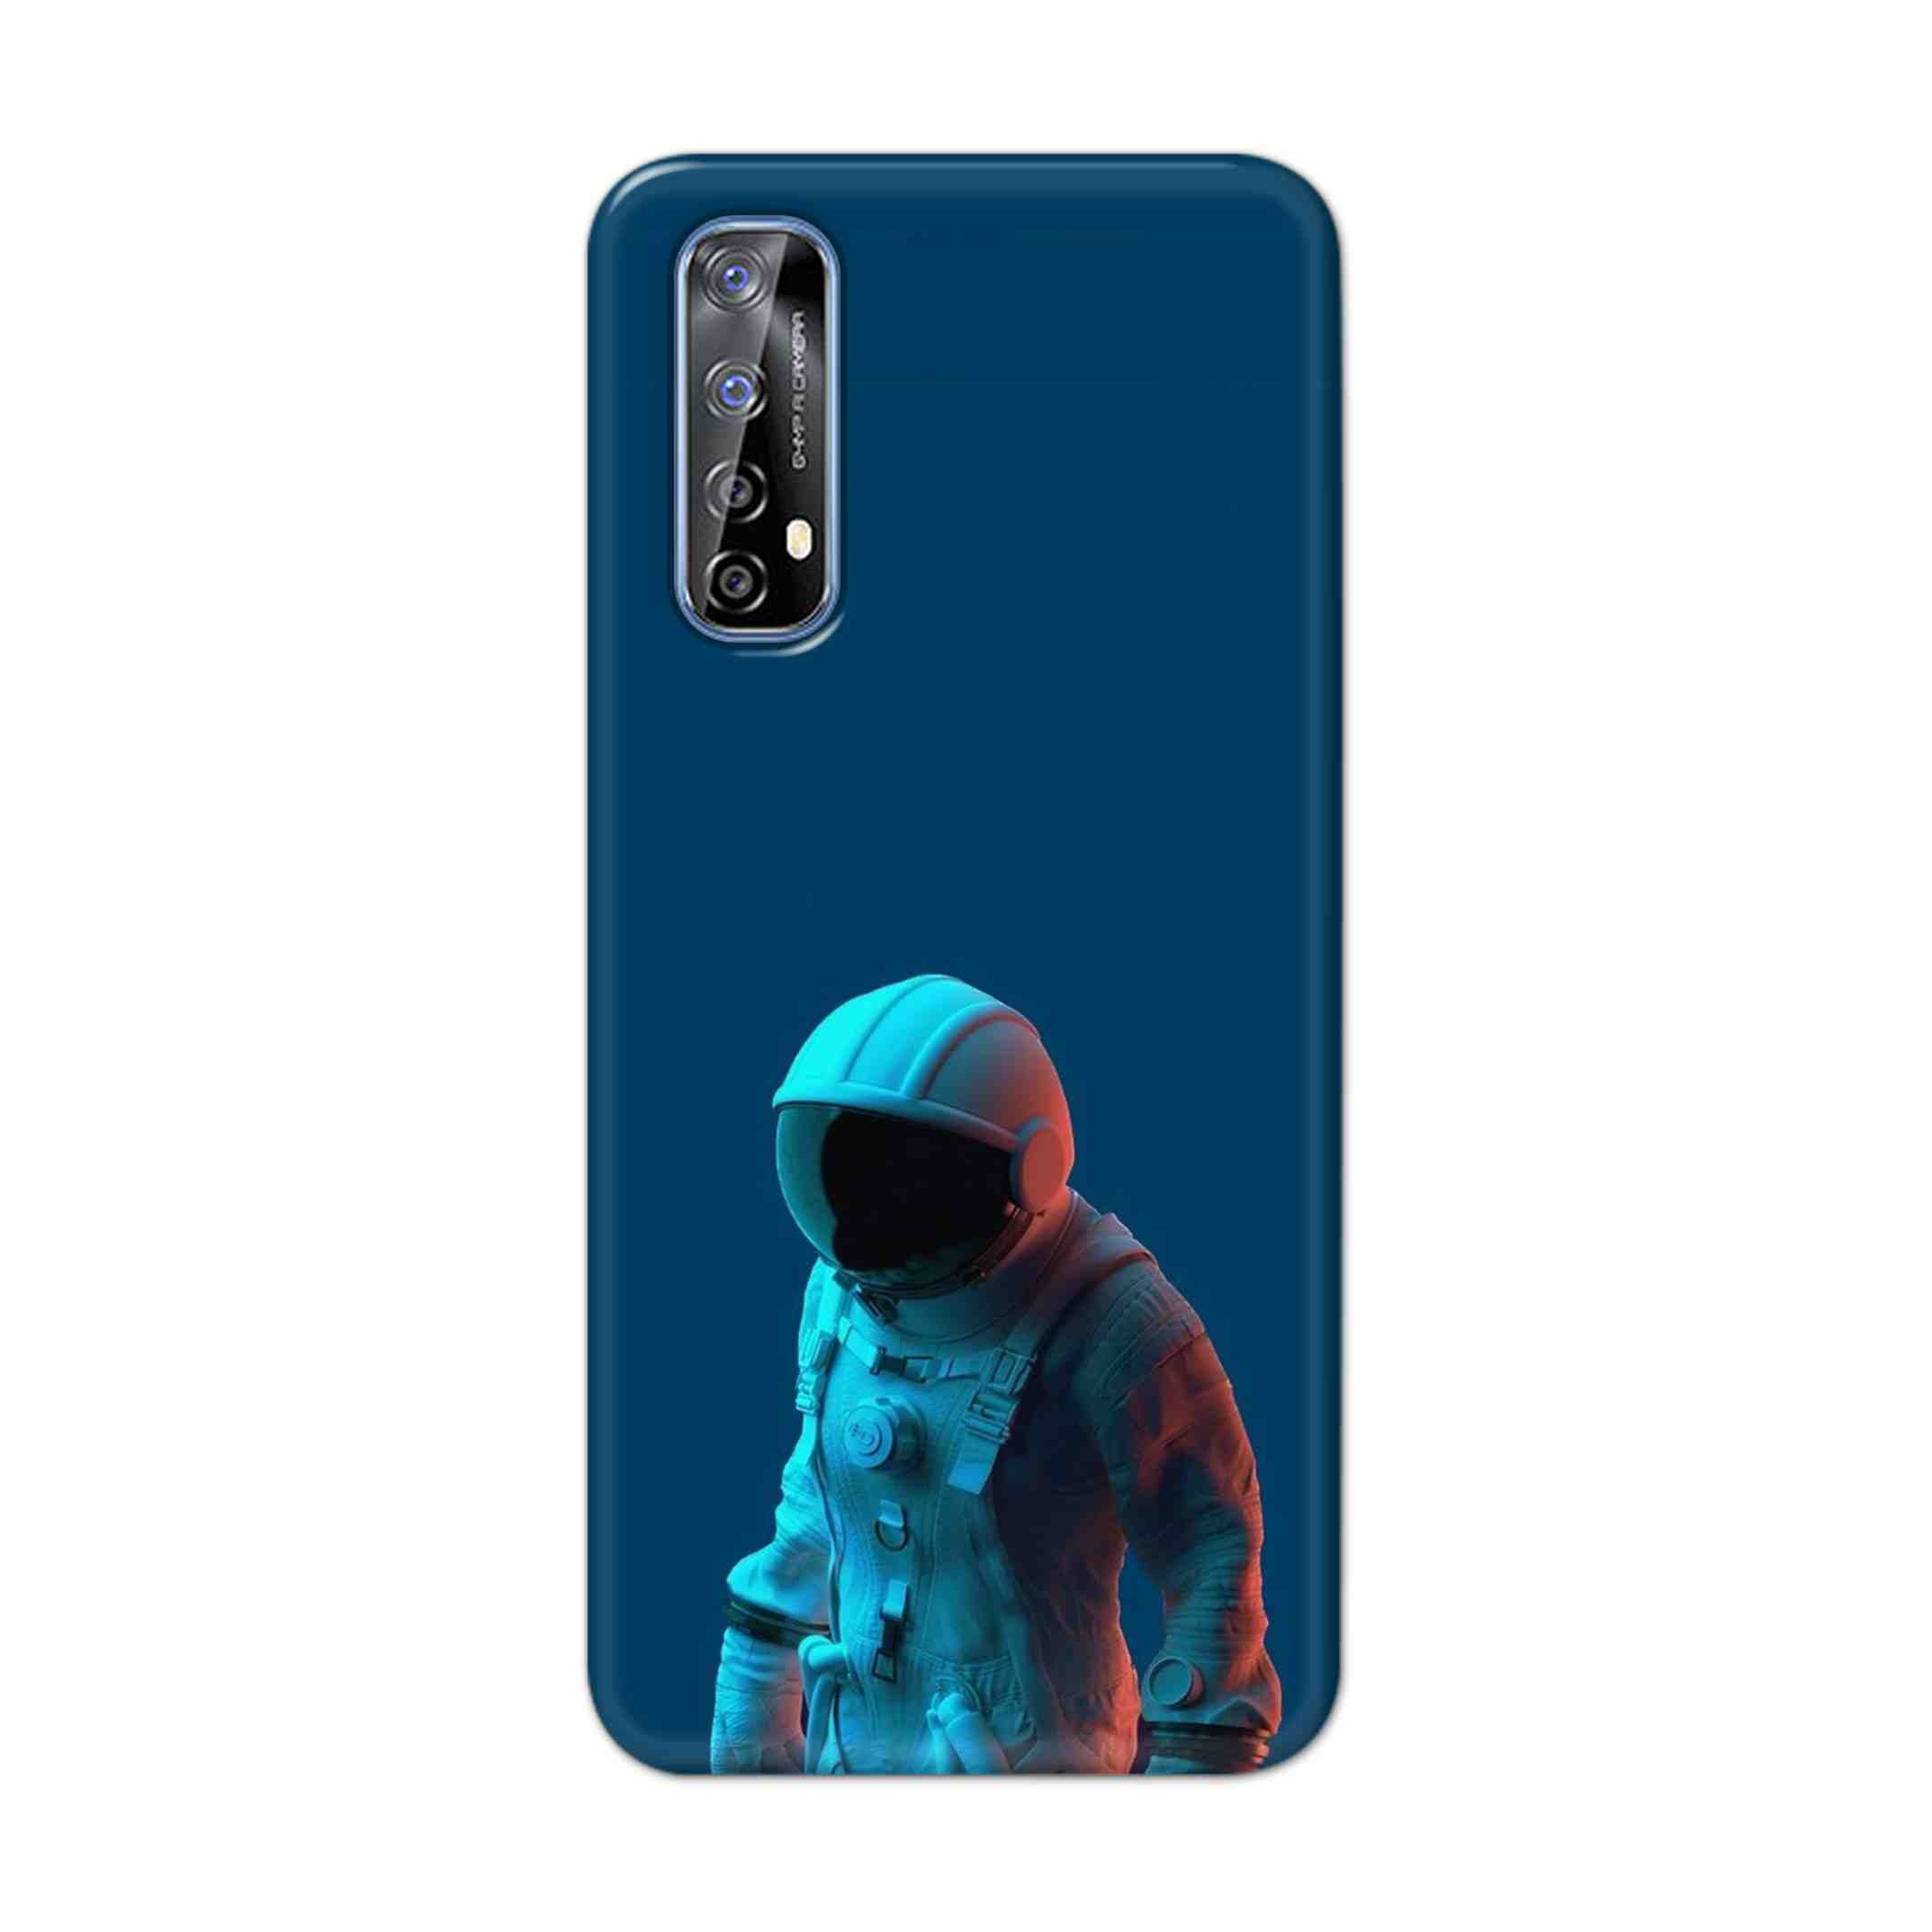 Buy Blue Astronaut Hard Back Mobile Phone Case Cover For Realme 7 Online